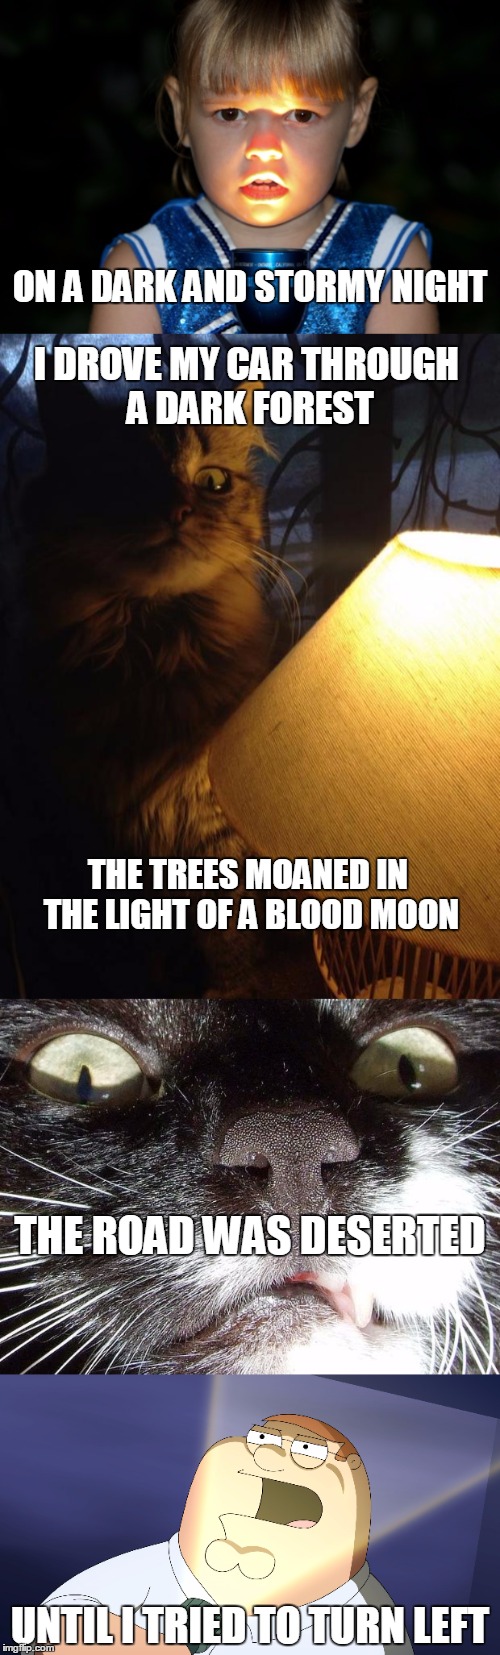 Scary Story | ON A DARK AND STORMY NIGHT; I DROVE MY CAR THROUGH A DARK FOREST; THE TREES MOANED IN THE LIGHT OF A BLOOD MOON; THE ROAD WAS DESERTED; UNTIL I TRIED TO TURN LEFT | image tagged in scary,spooky,cute cat,cute girl,car,horror | made w/ Imgflip meme maker